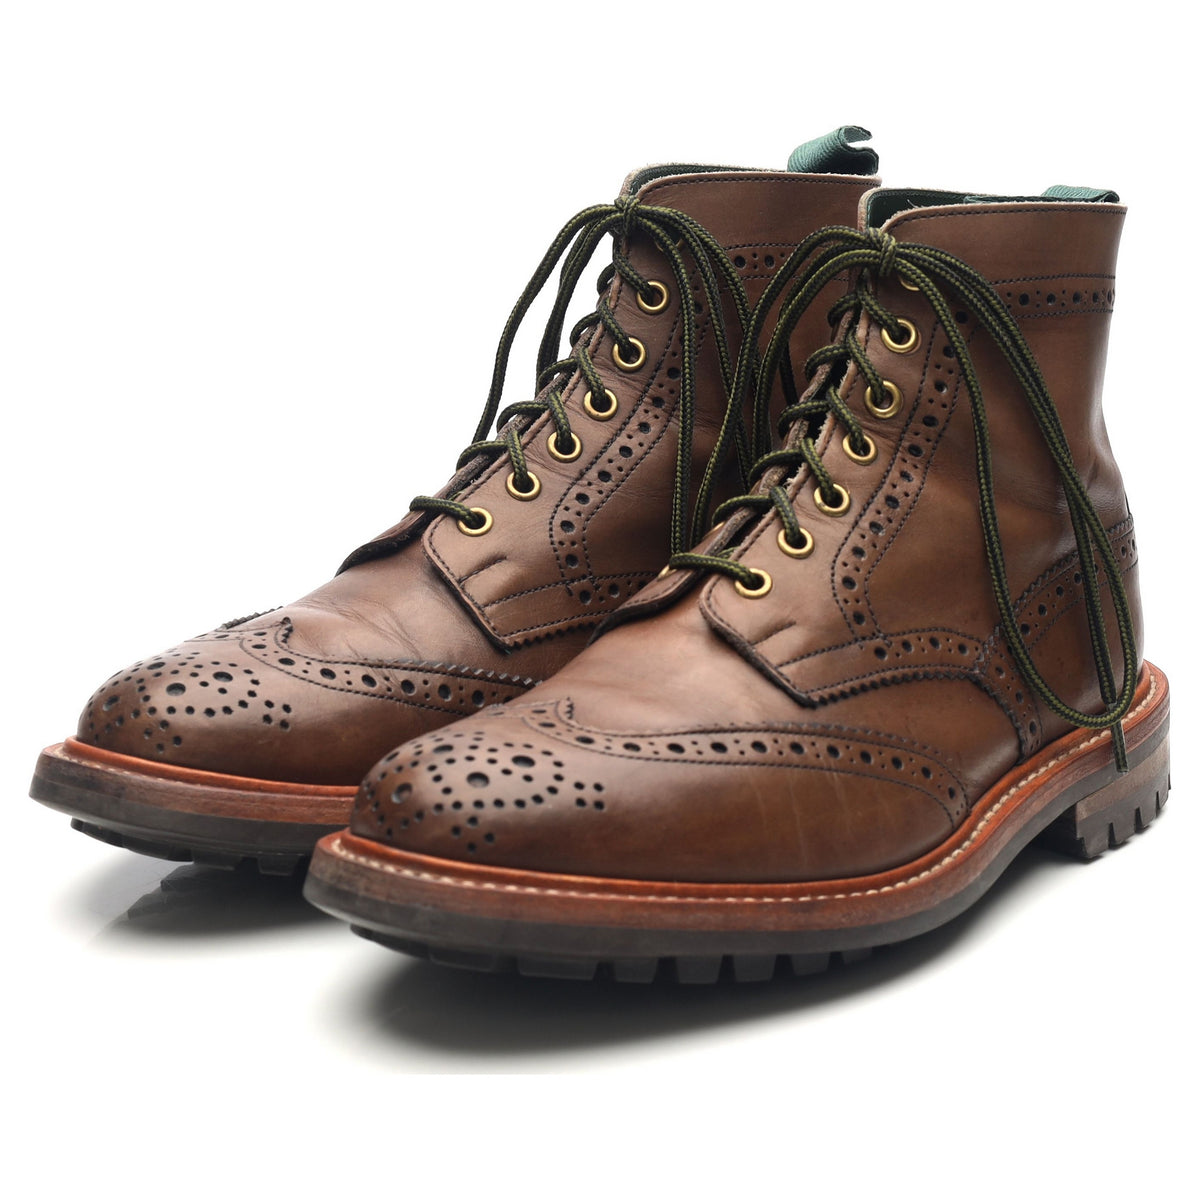 Stow' Brown Leather Brogue Boots UK 7.5 - Abbot's Shoes